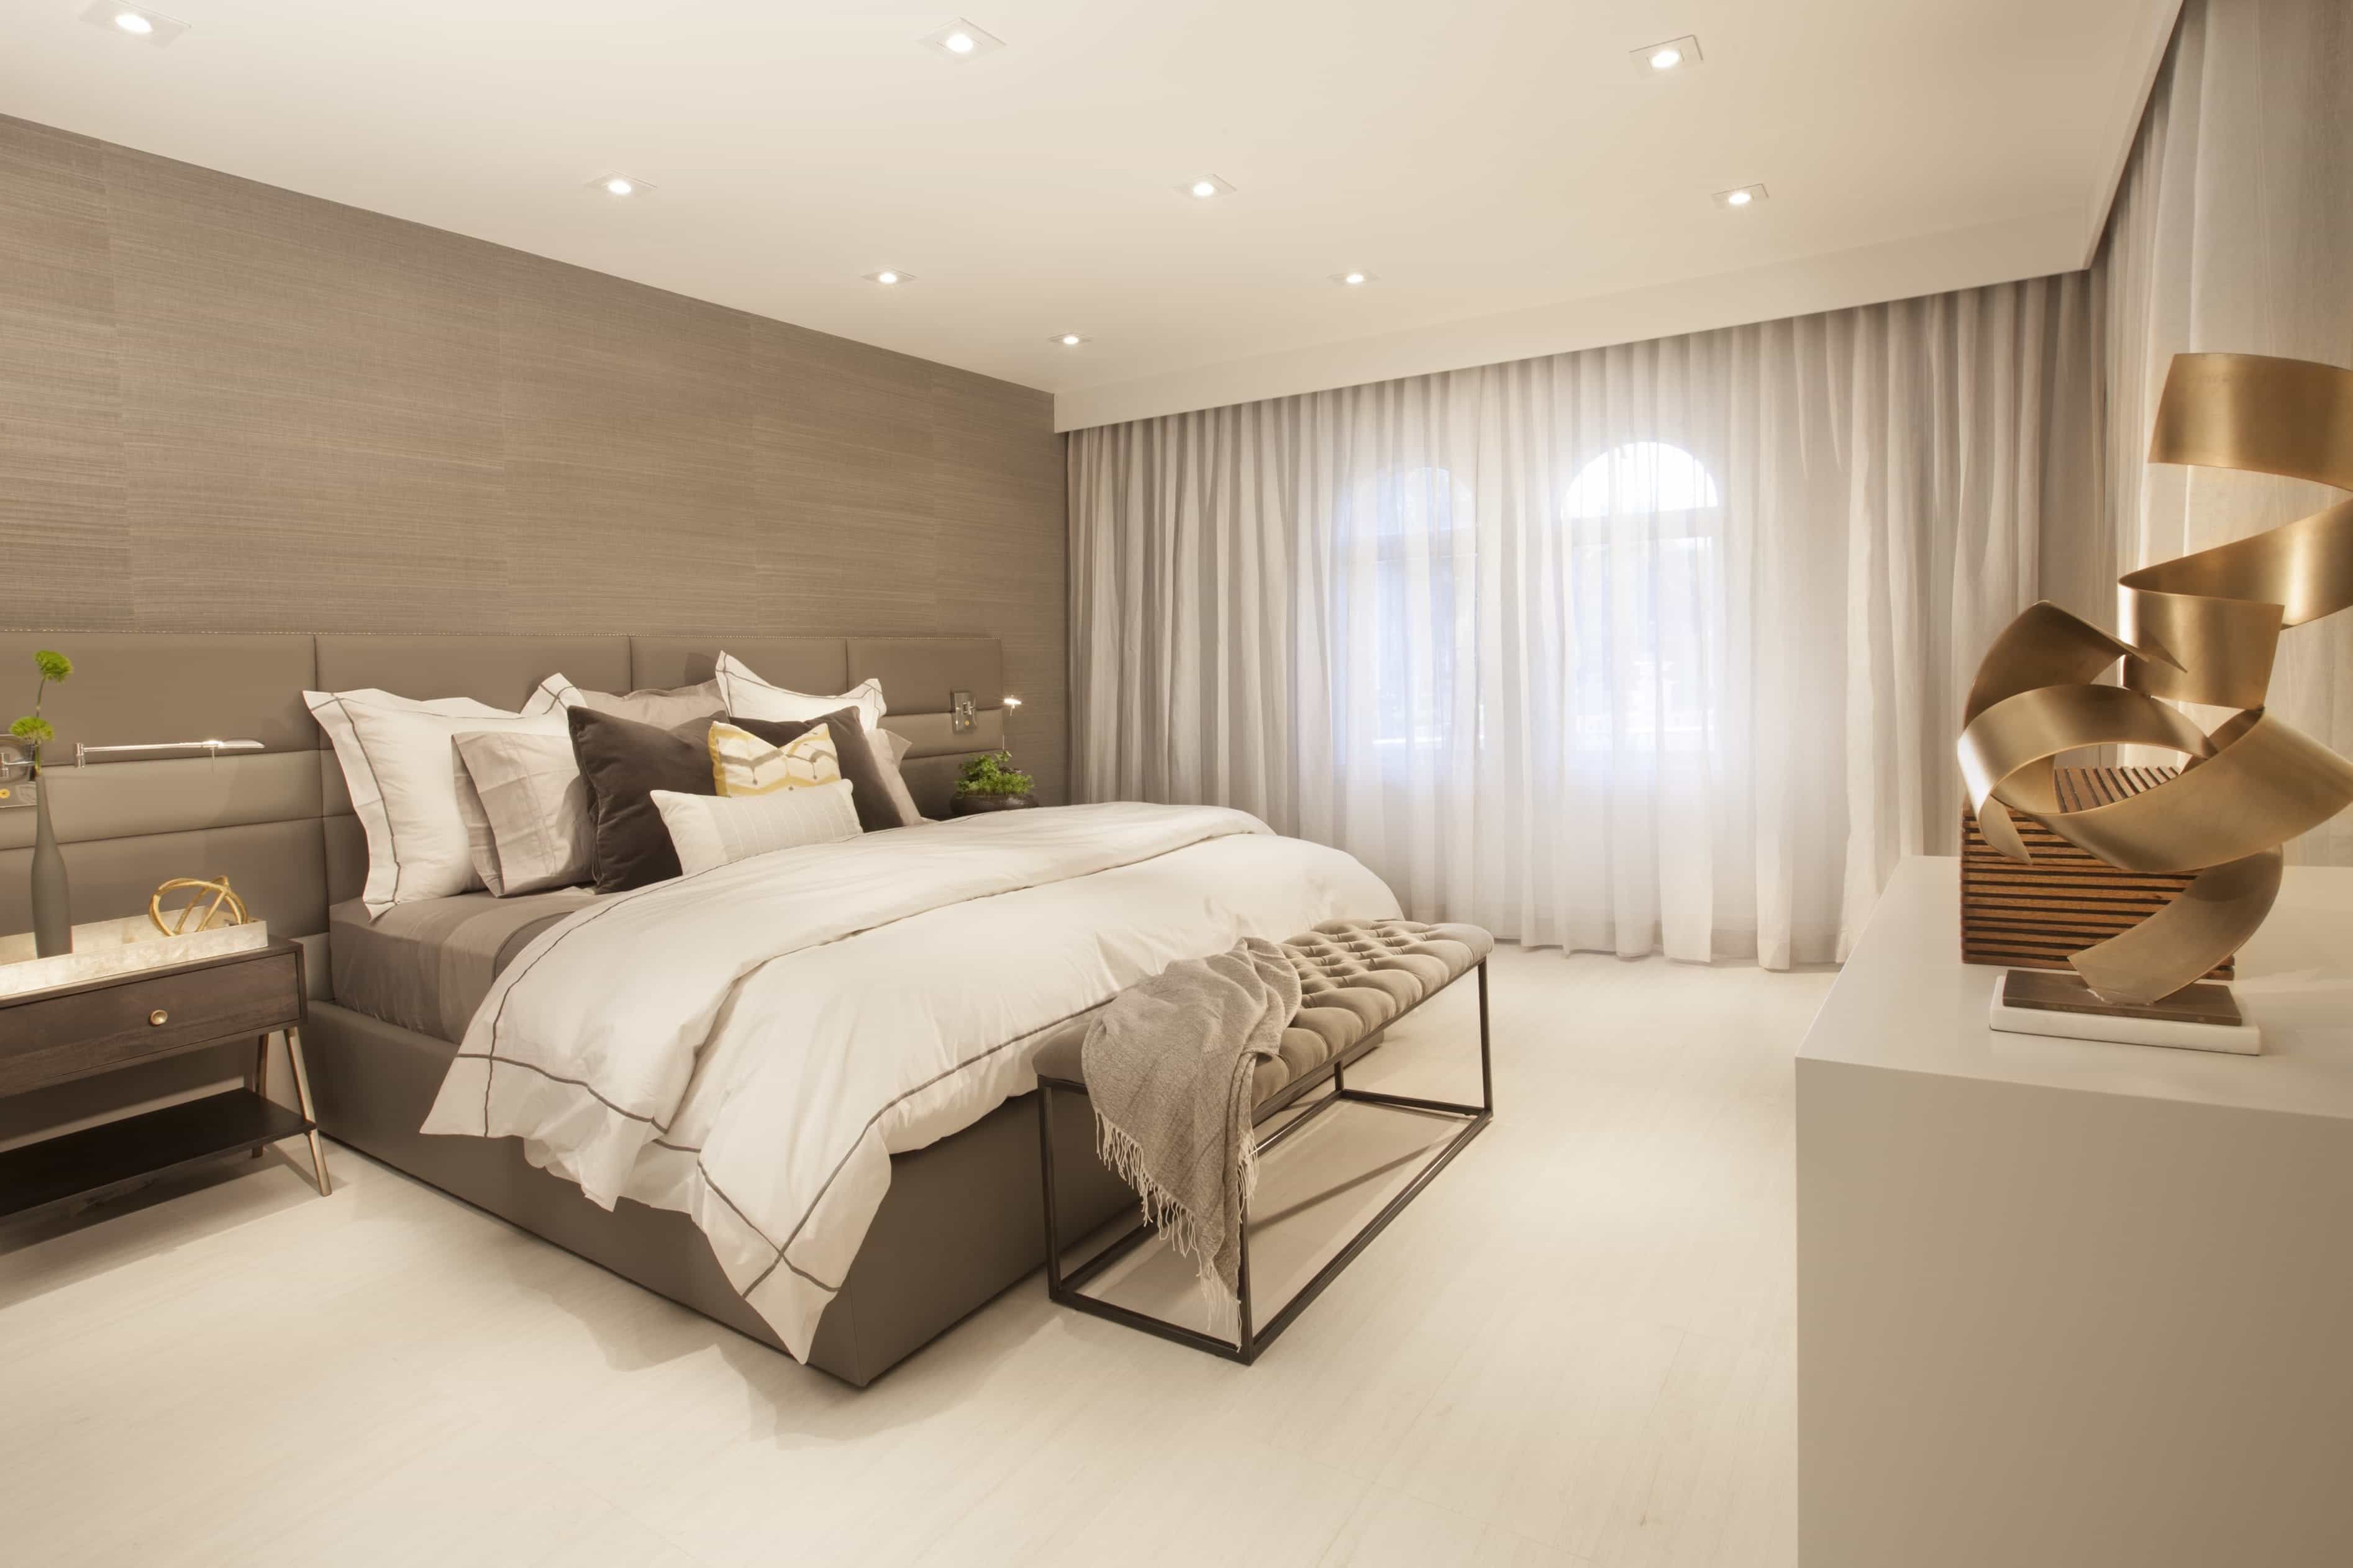 Gray Accent Wall Adds Texture To Calm Modern Bedroom Decoration In Minimalist Style (View 6 of 16)